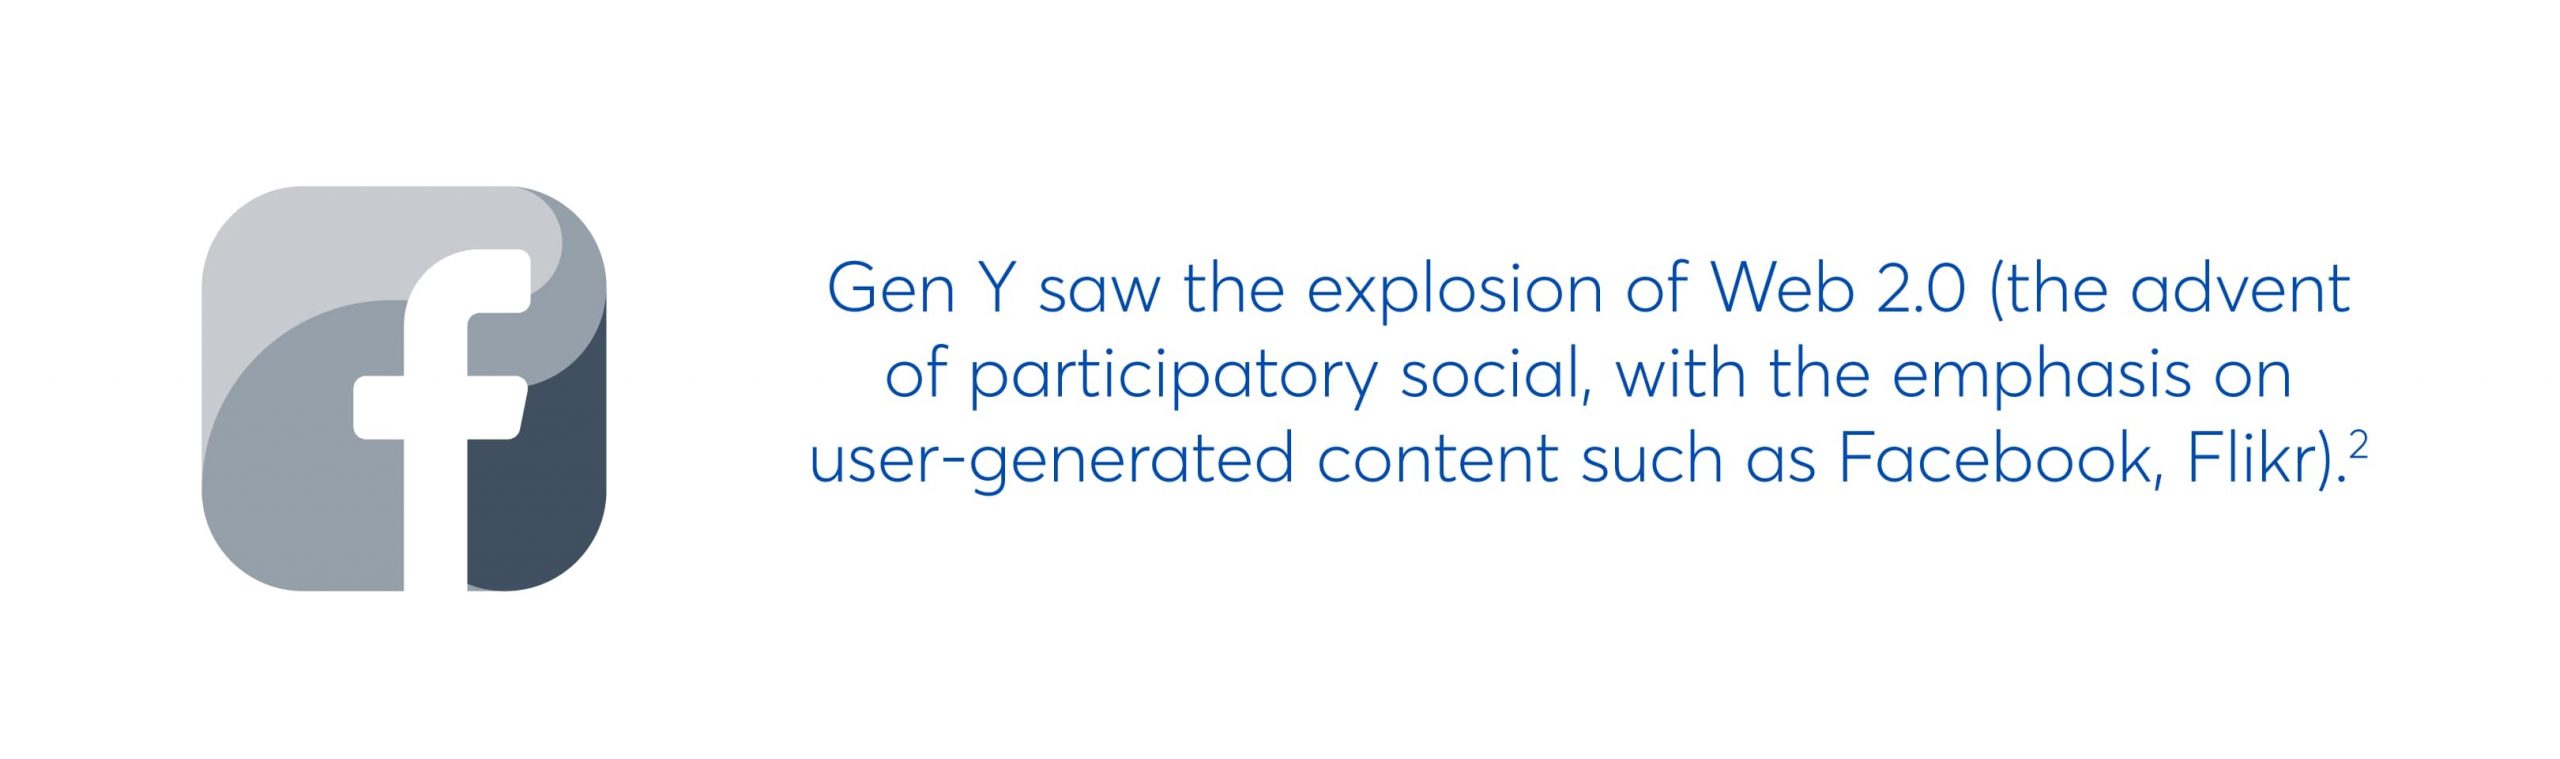 gen y saw the explosion of web 2.0 (the advent of participatory social, with the emphasis on user-generated content such as facebook, flickr)